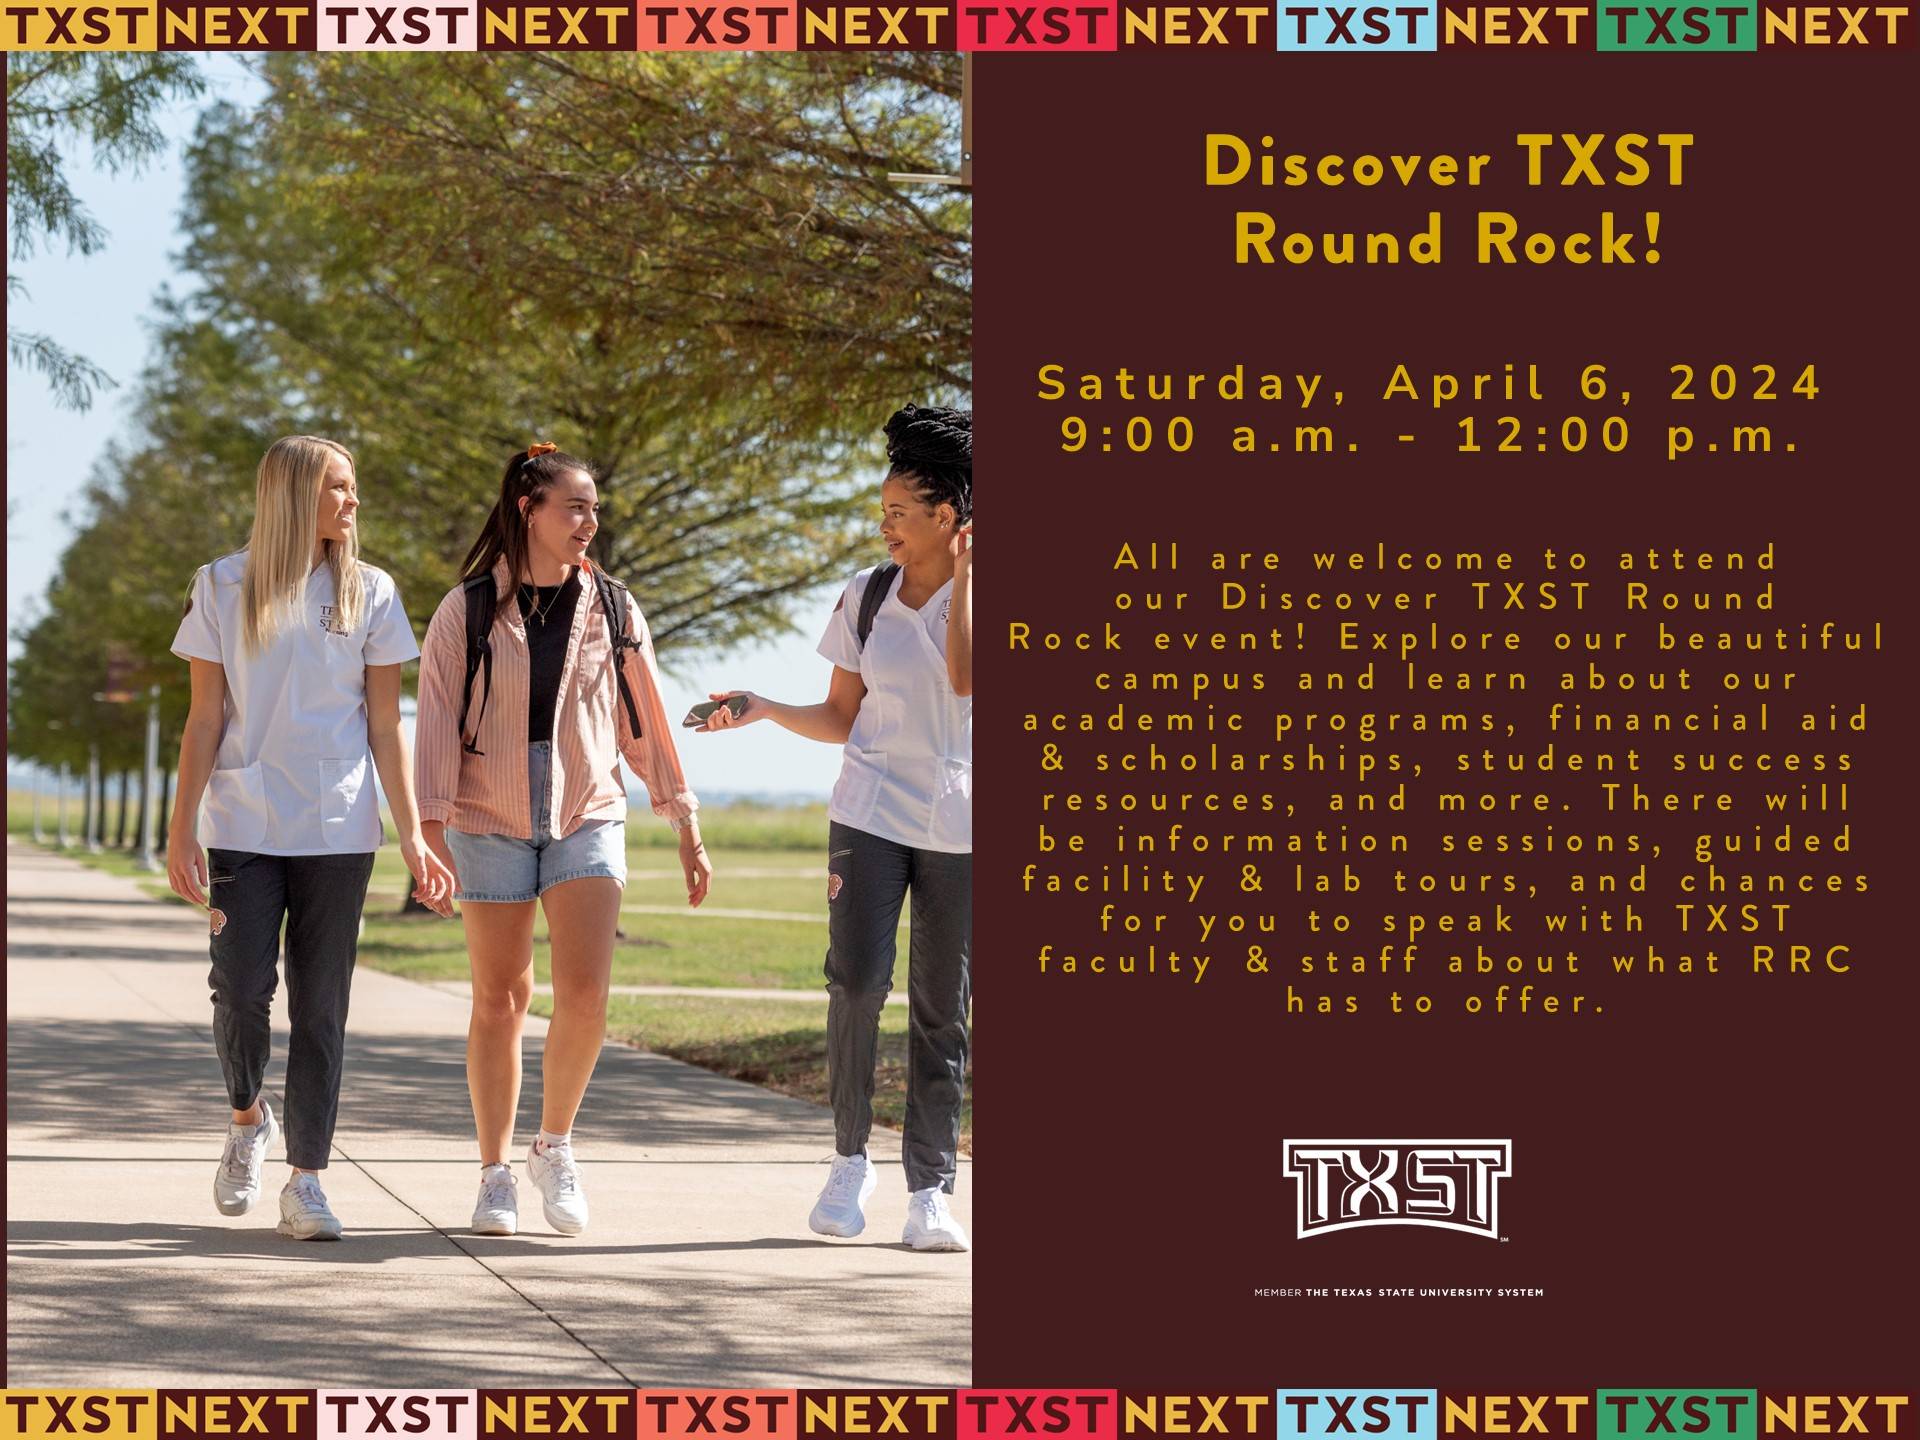 Students walking on Round Rock Campus for April 6 recruitment event announcement